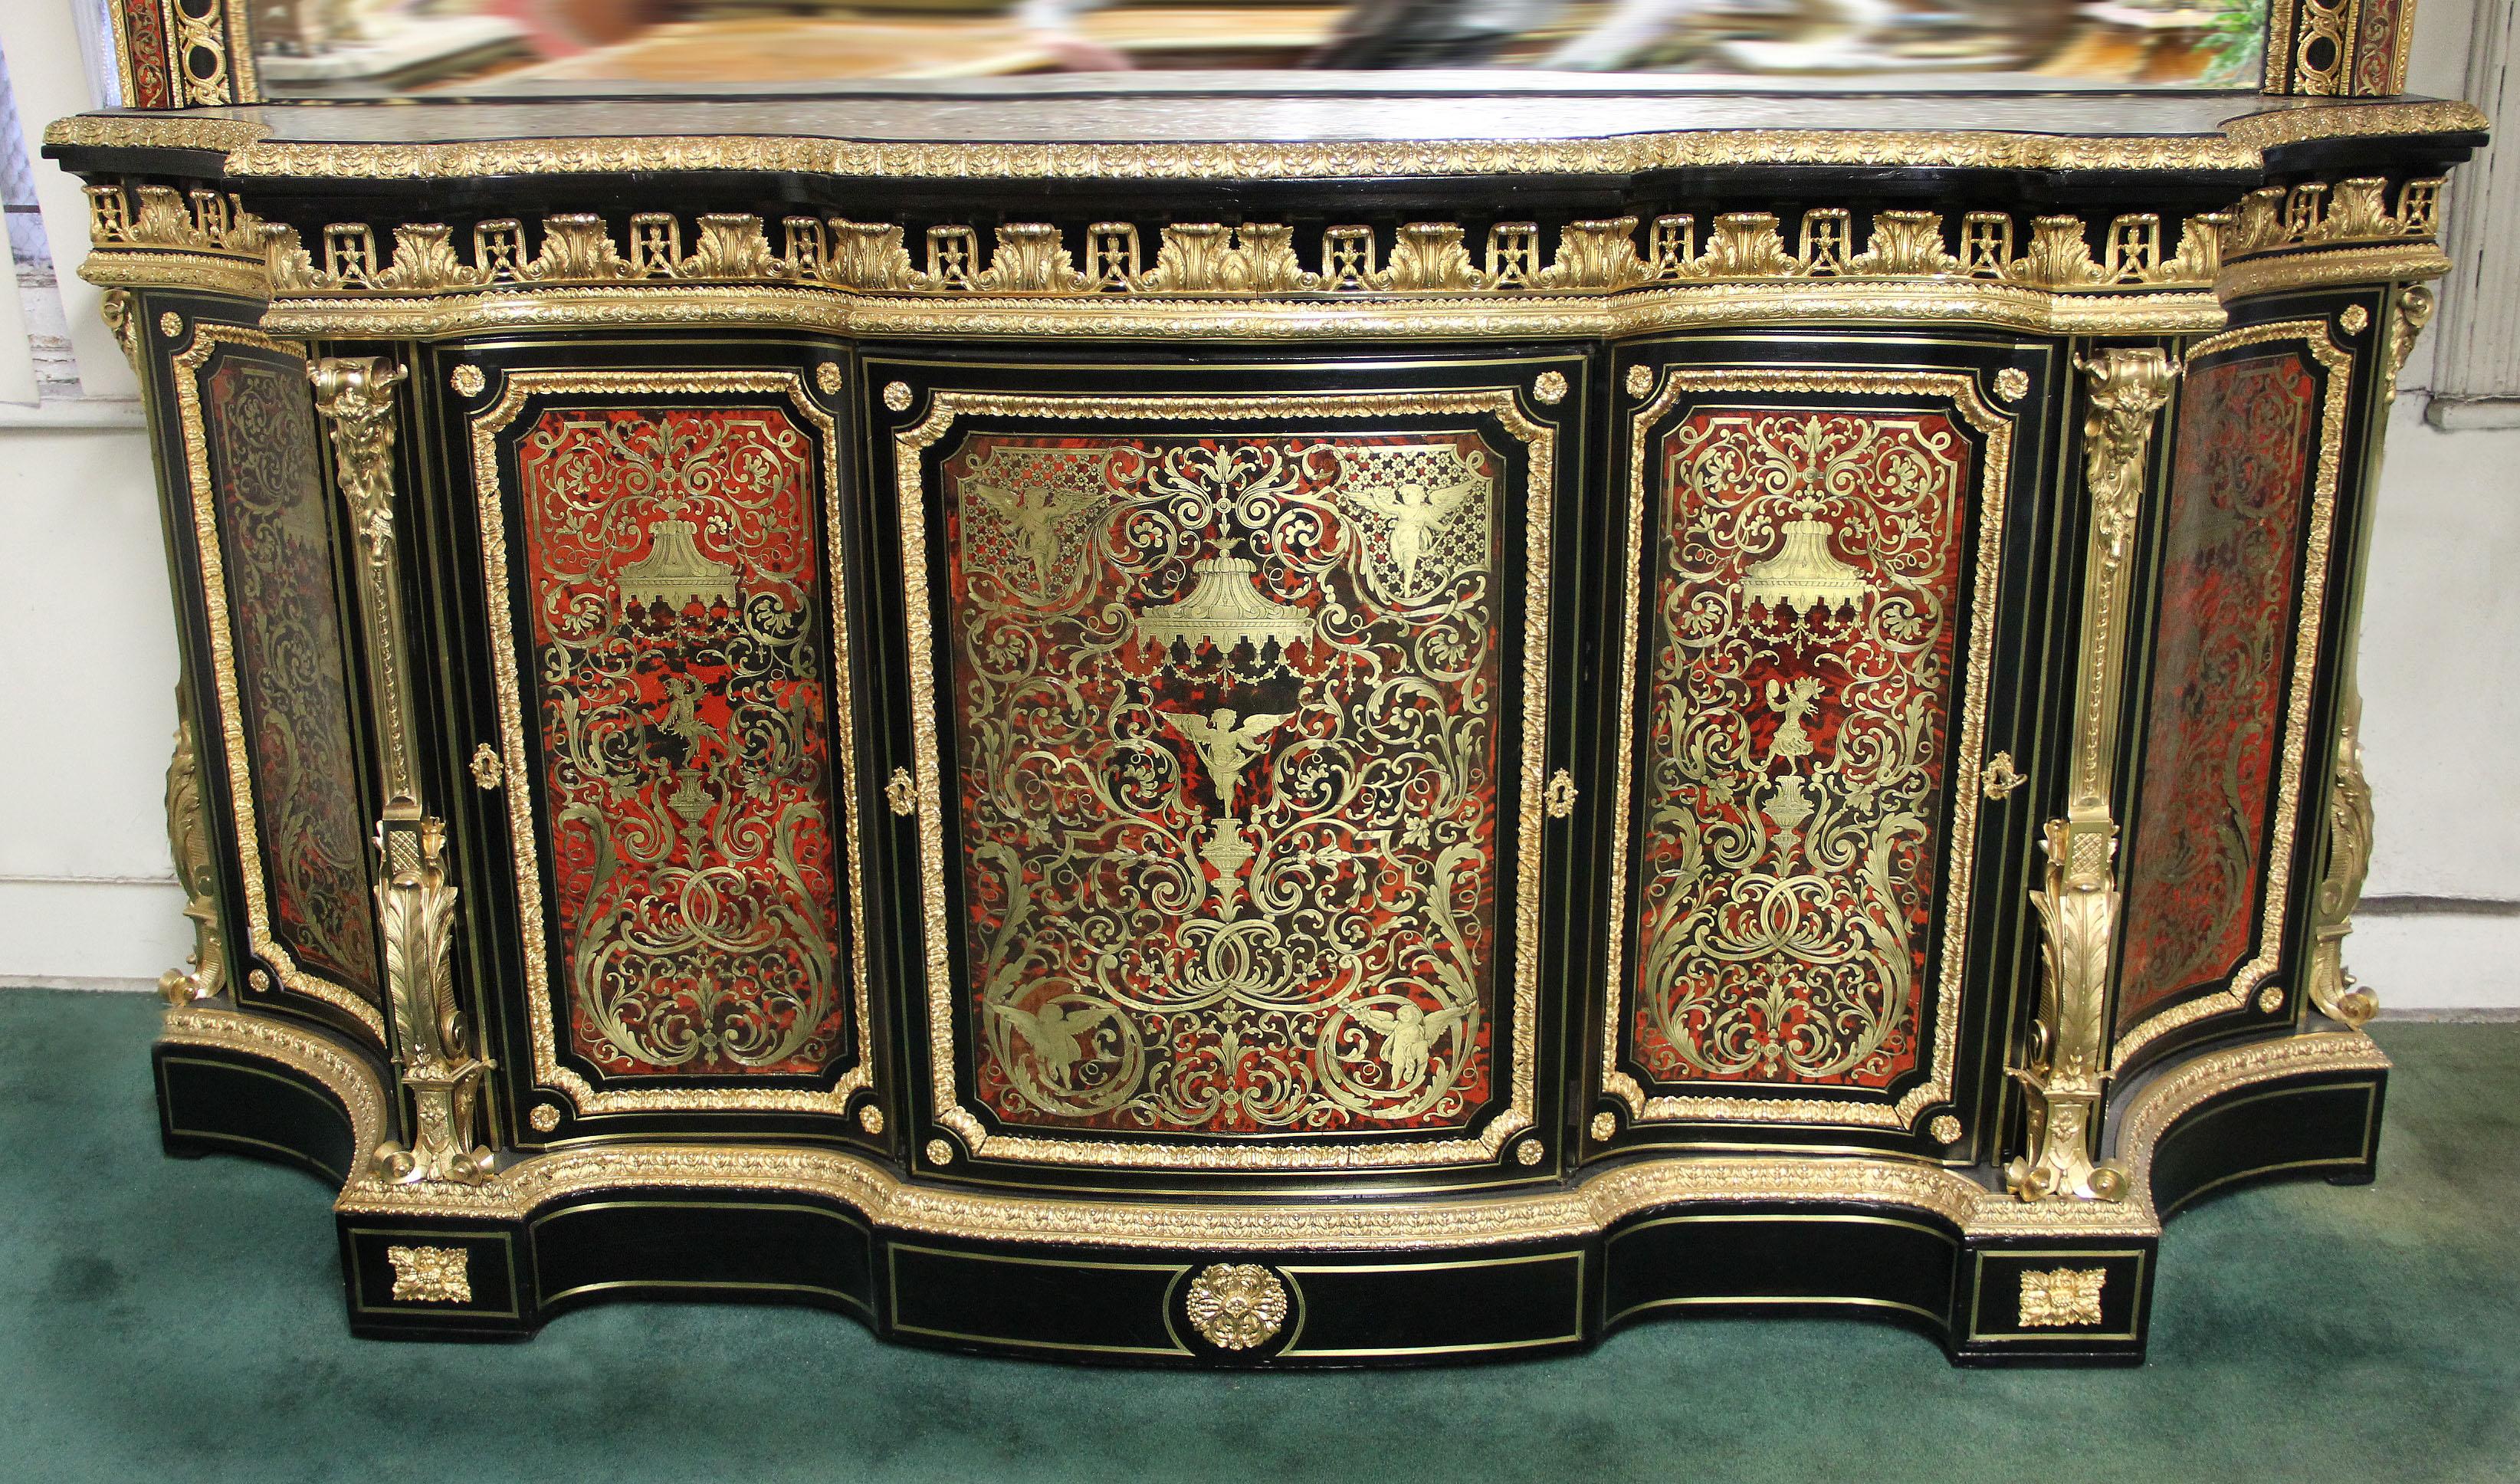 A mid-late 19th century monumental Napoleon III gilt bronze mounted ebony, red tortoiseshell and designed brass Boulle style cabinet and mirror

Each Boulle style marquetry panel with designs in the manner of Jean Bérain, the cabinet surmounted by